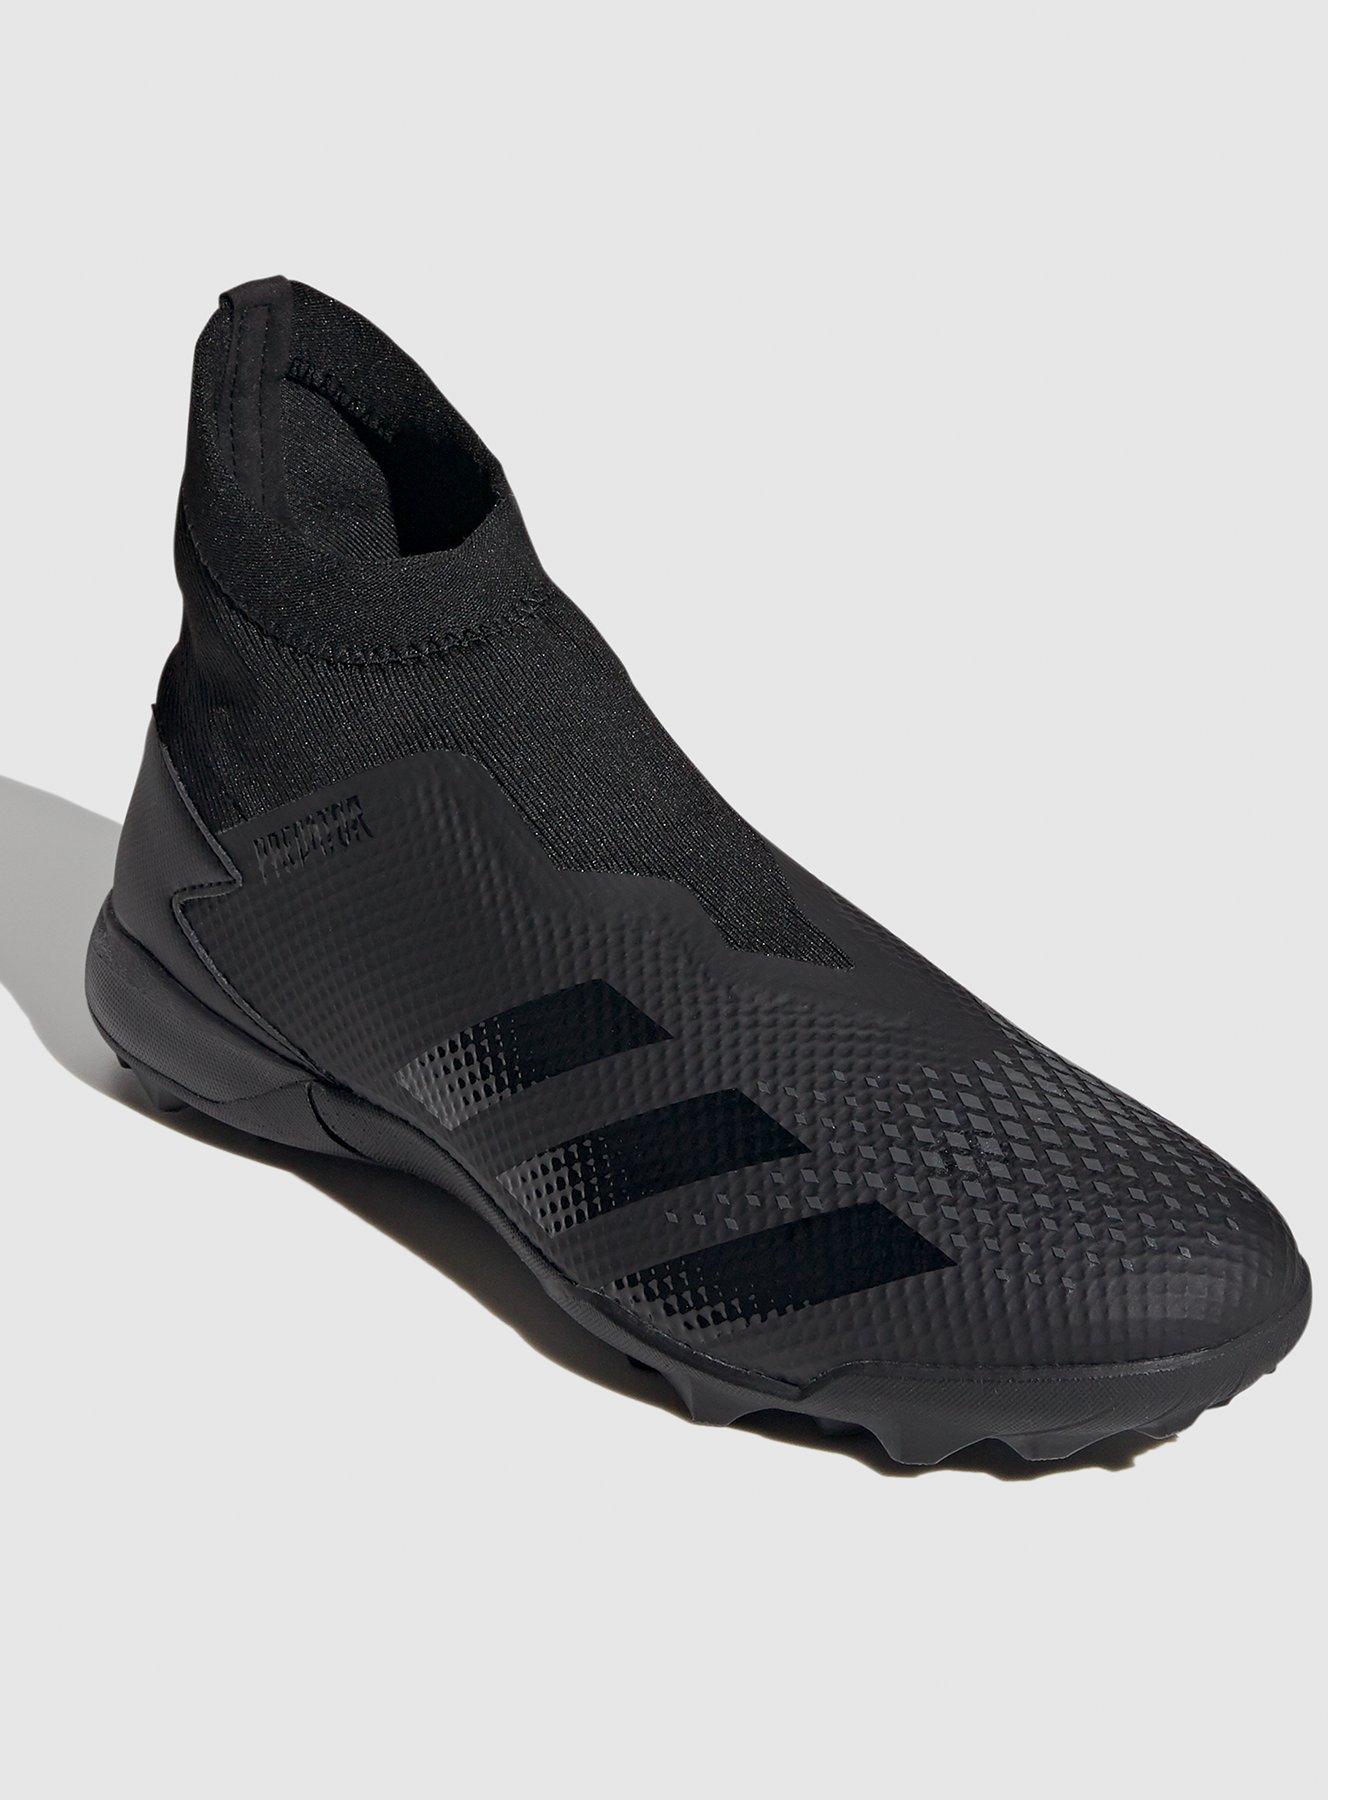 laceless football boots astro